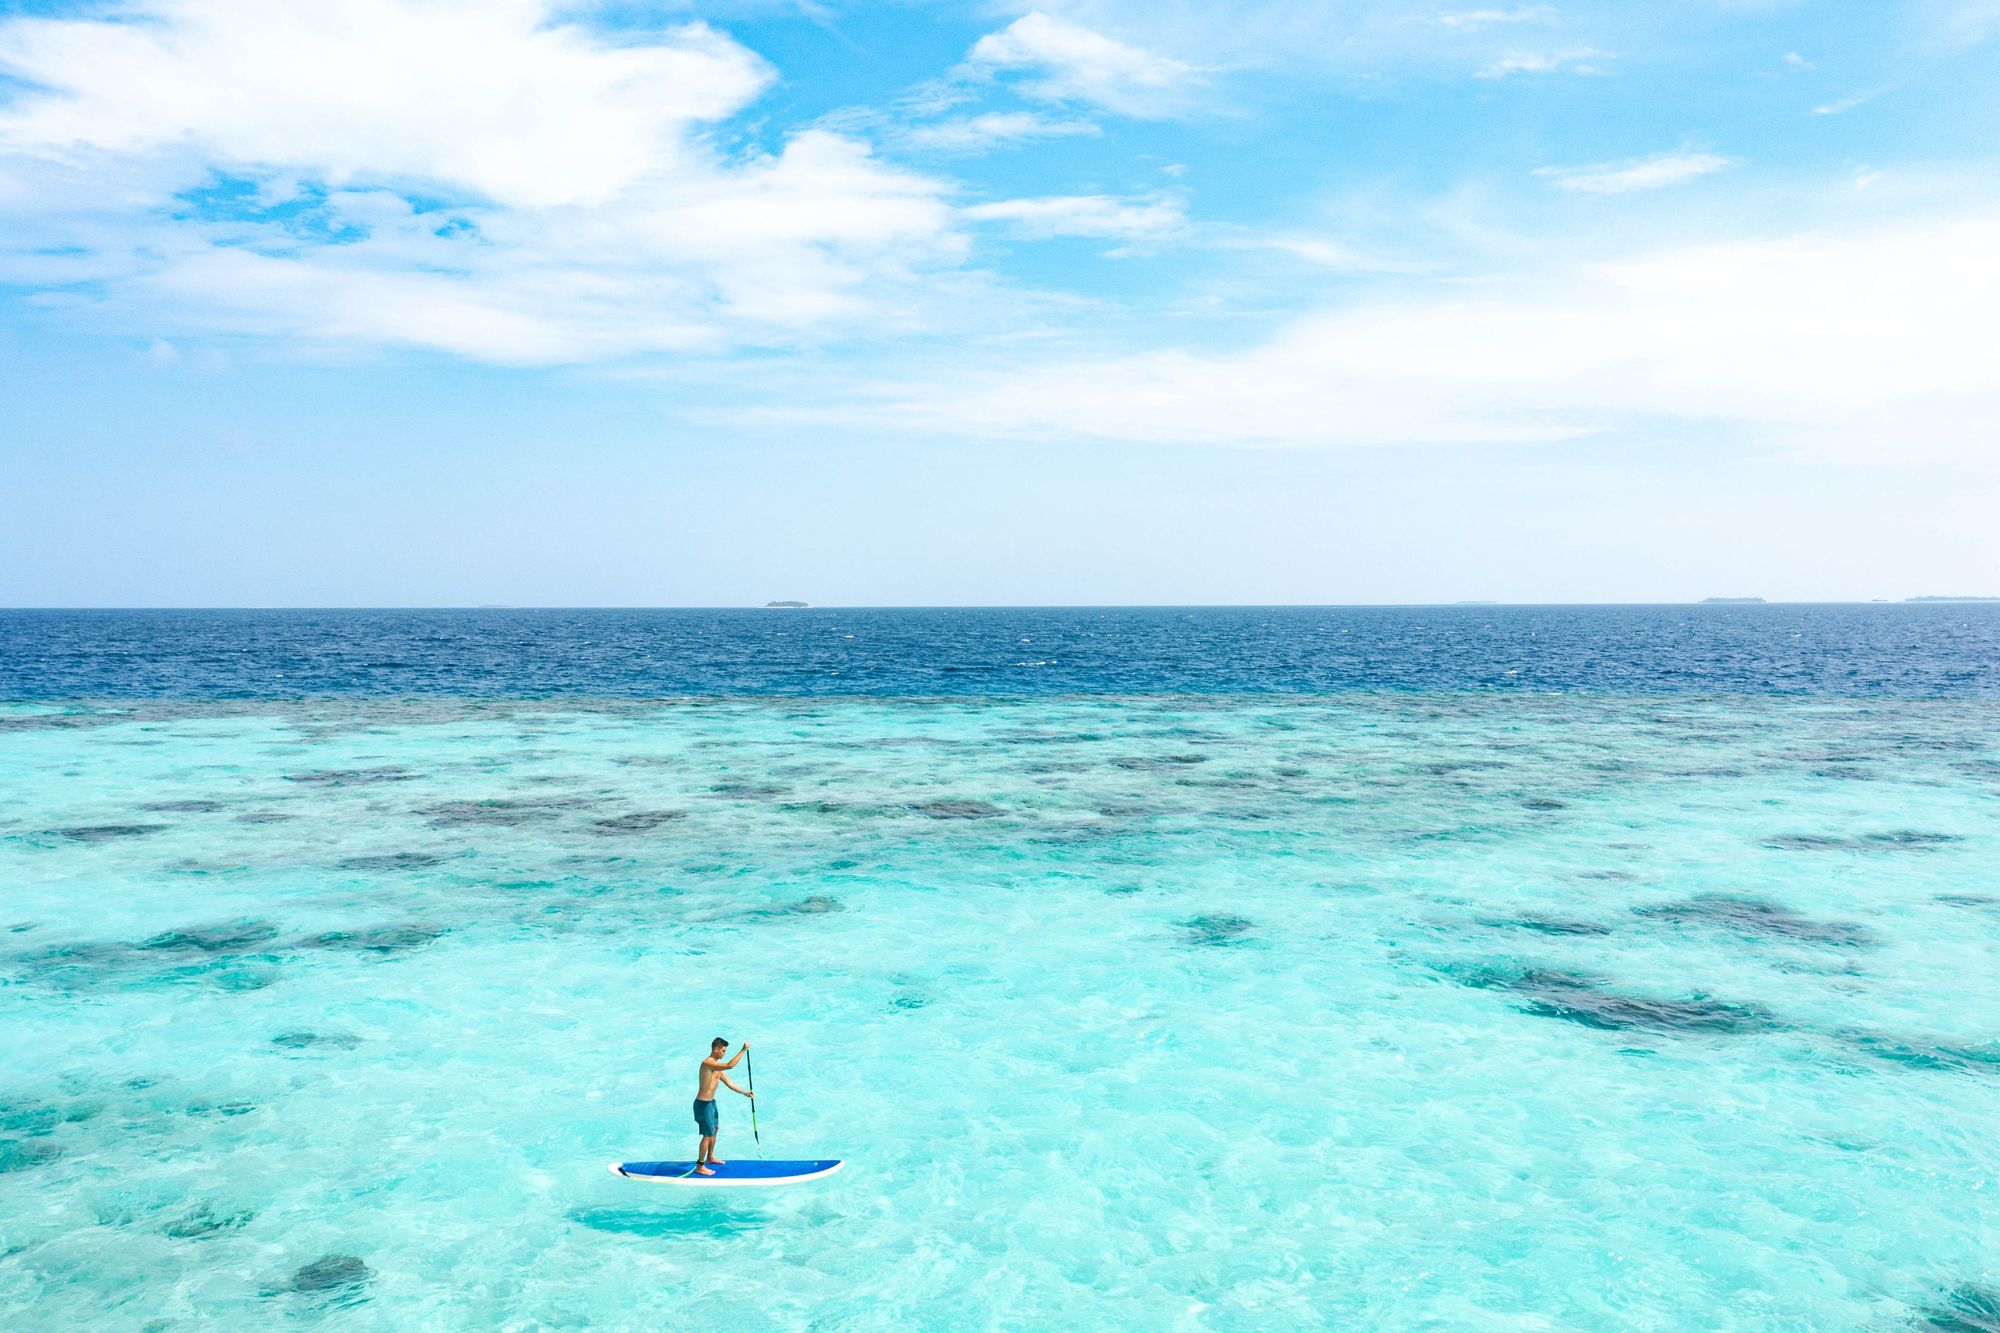 A man stand up paddleboarding in the Maldives, surrounded by turquoise ocean.